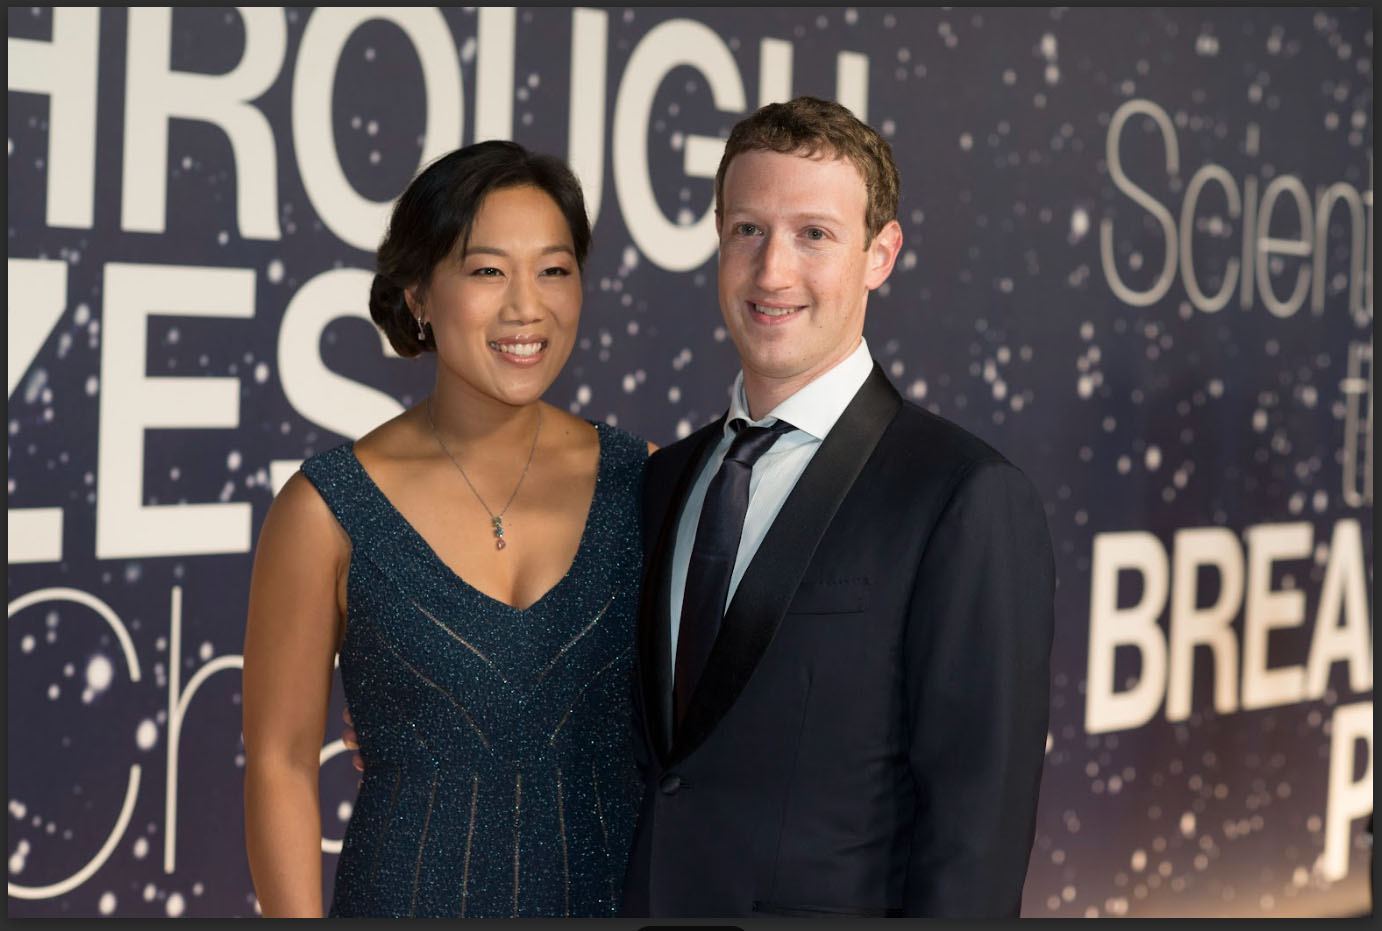 Priscilla Chan and Mark Zuckerberg arrive at the 2nd Annual Breakthrough Prize Award Ceremony at the NASA Ames Research Center on Sunday, Nov. 9, 2014 in Mountain View, California.